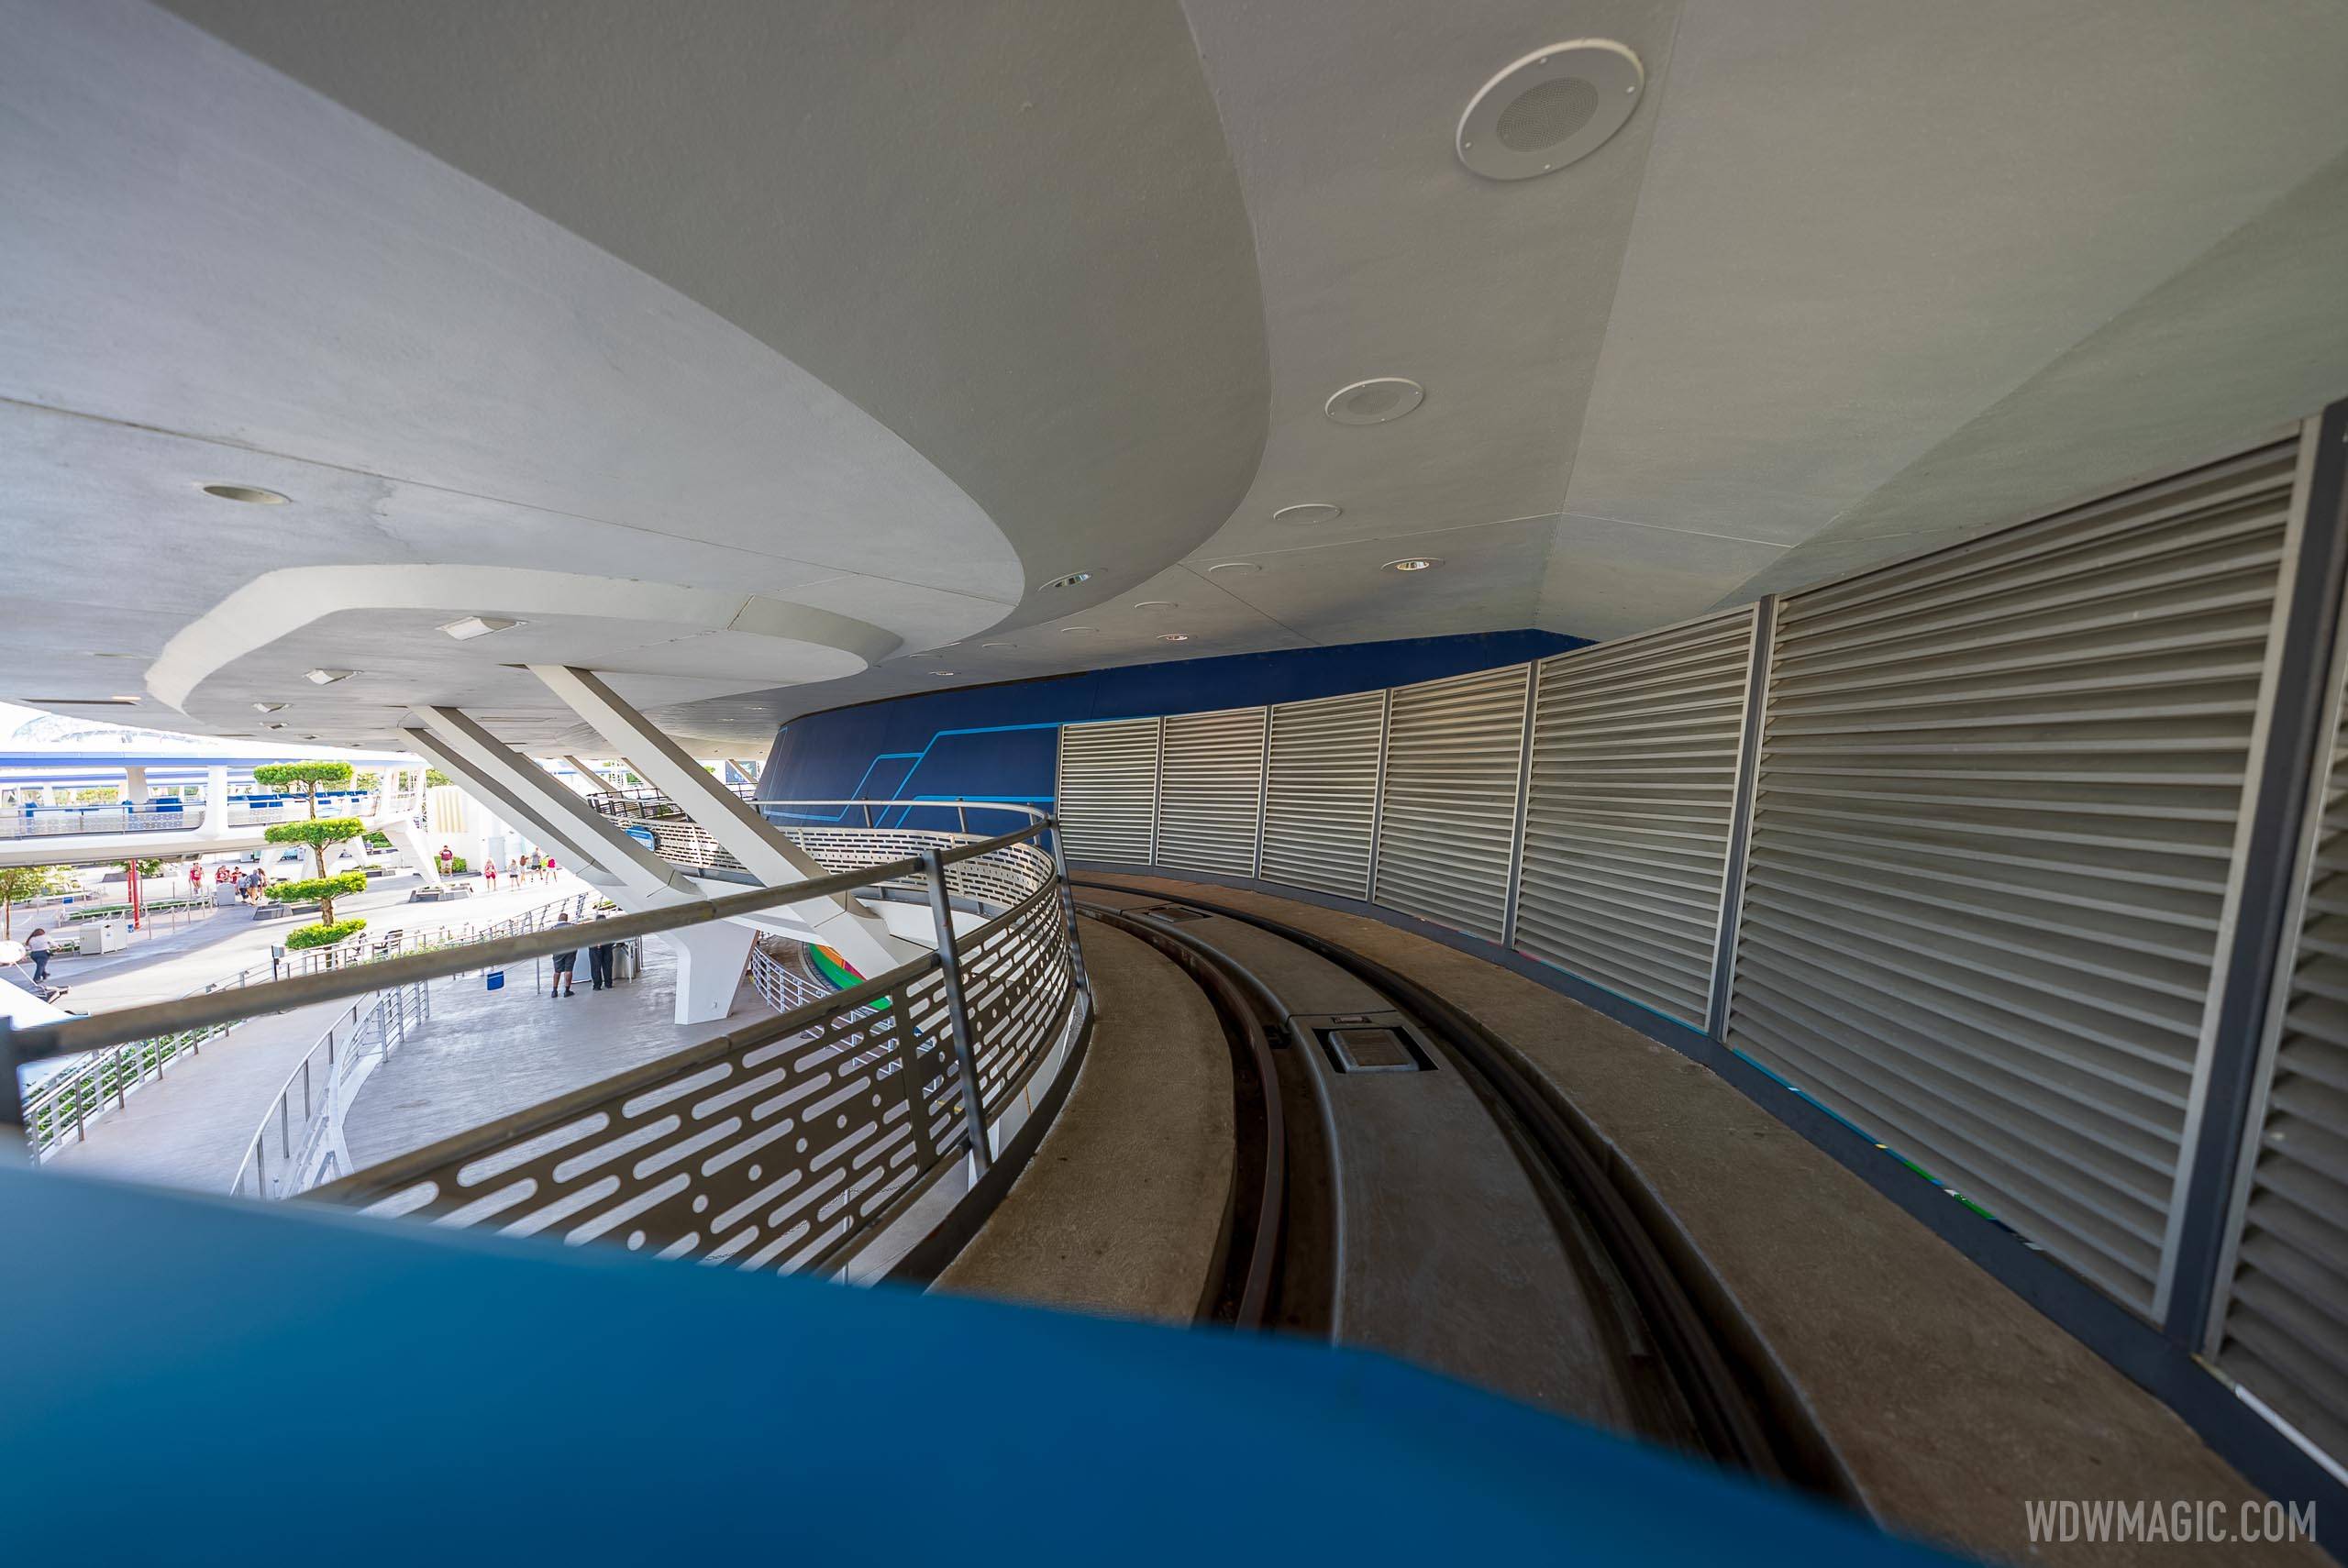 Postponed Tomorrowland Transit Authority PeopleMover refurbishment rescheduled for the summer